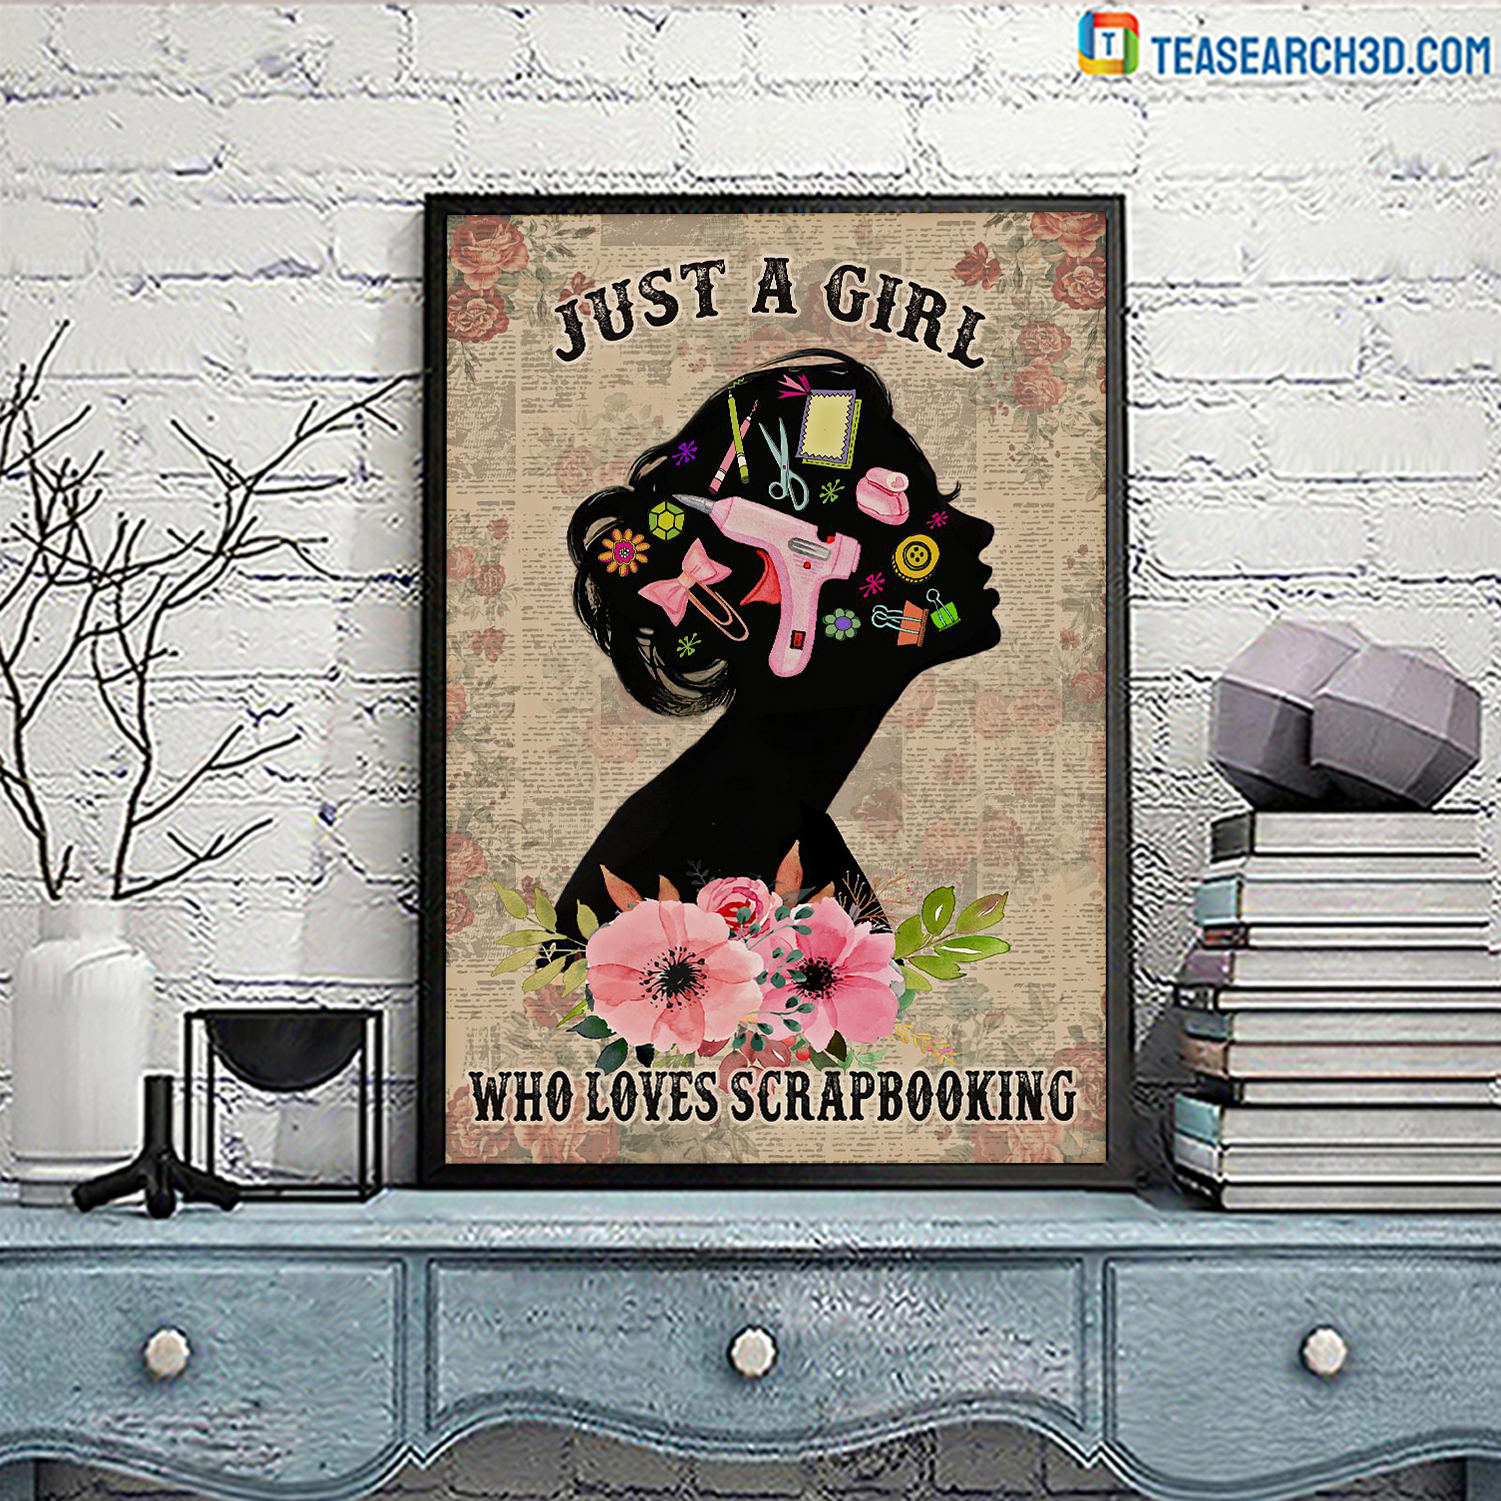 Just a girl who loves scrapbooking poster A2